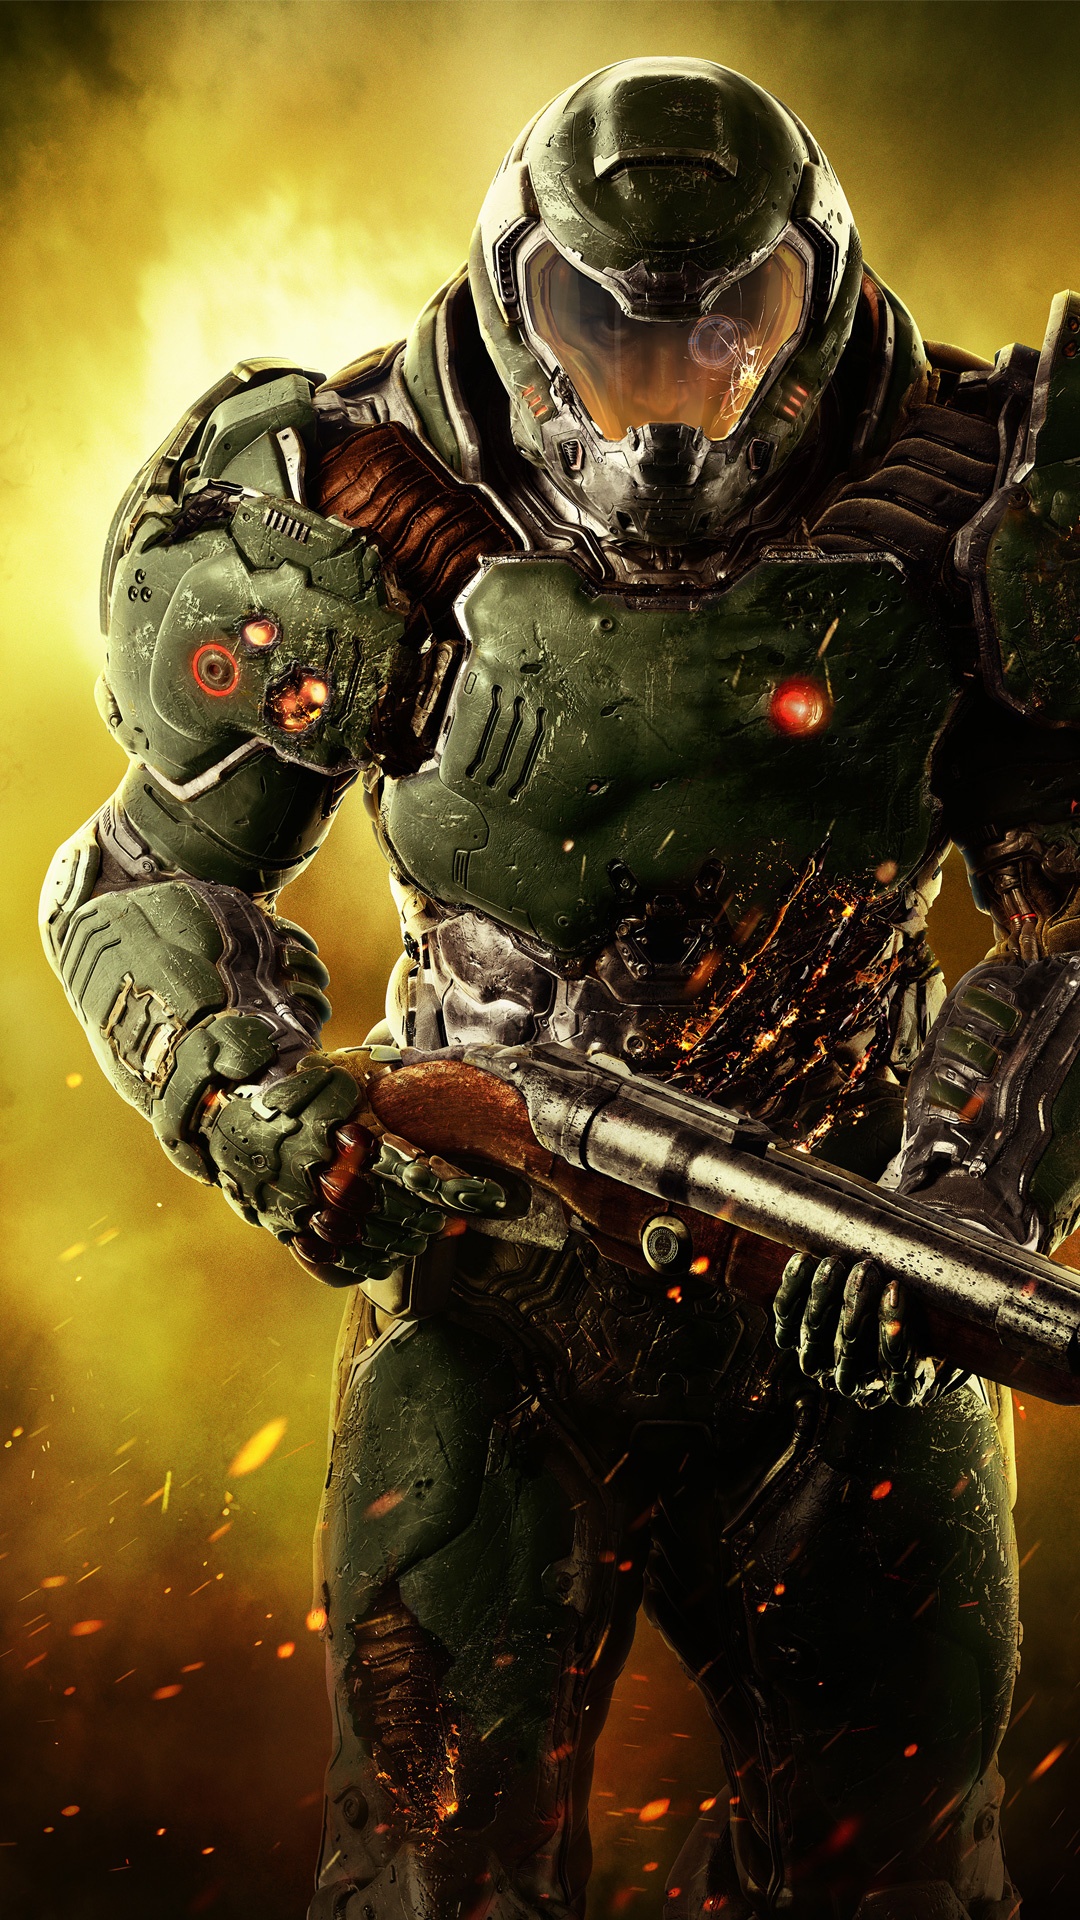 doom wallpaper hd,action adventure game,shooter game,pc game,games,soldier